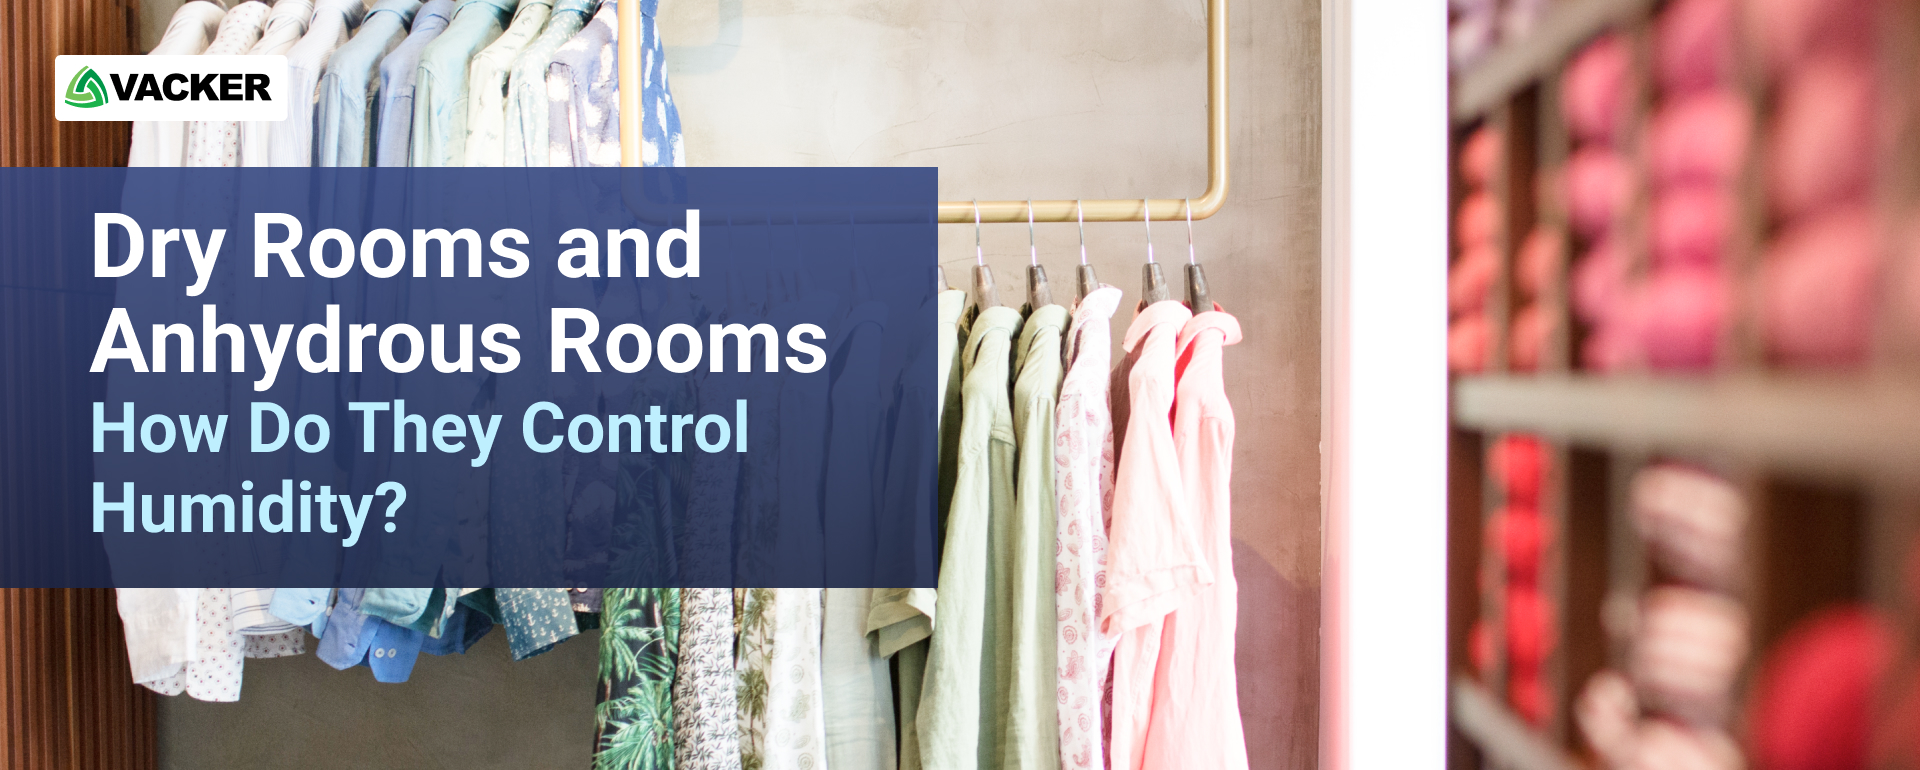 dry rooms and anhydrous rooms for humidity control